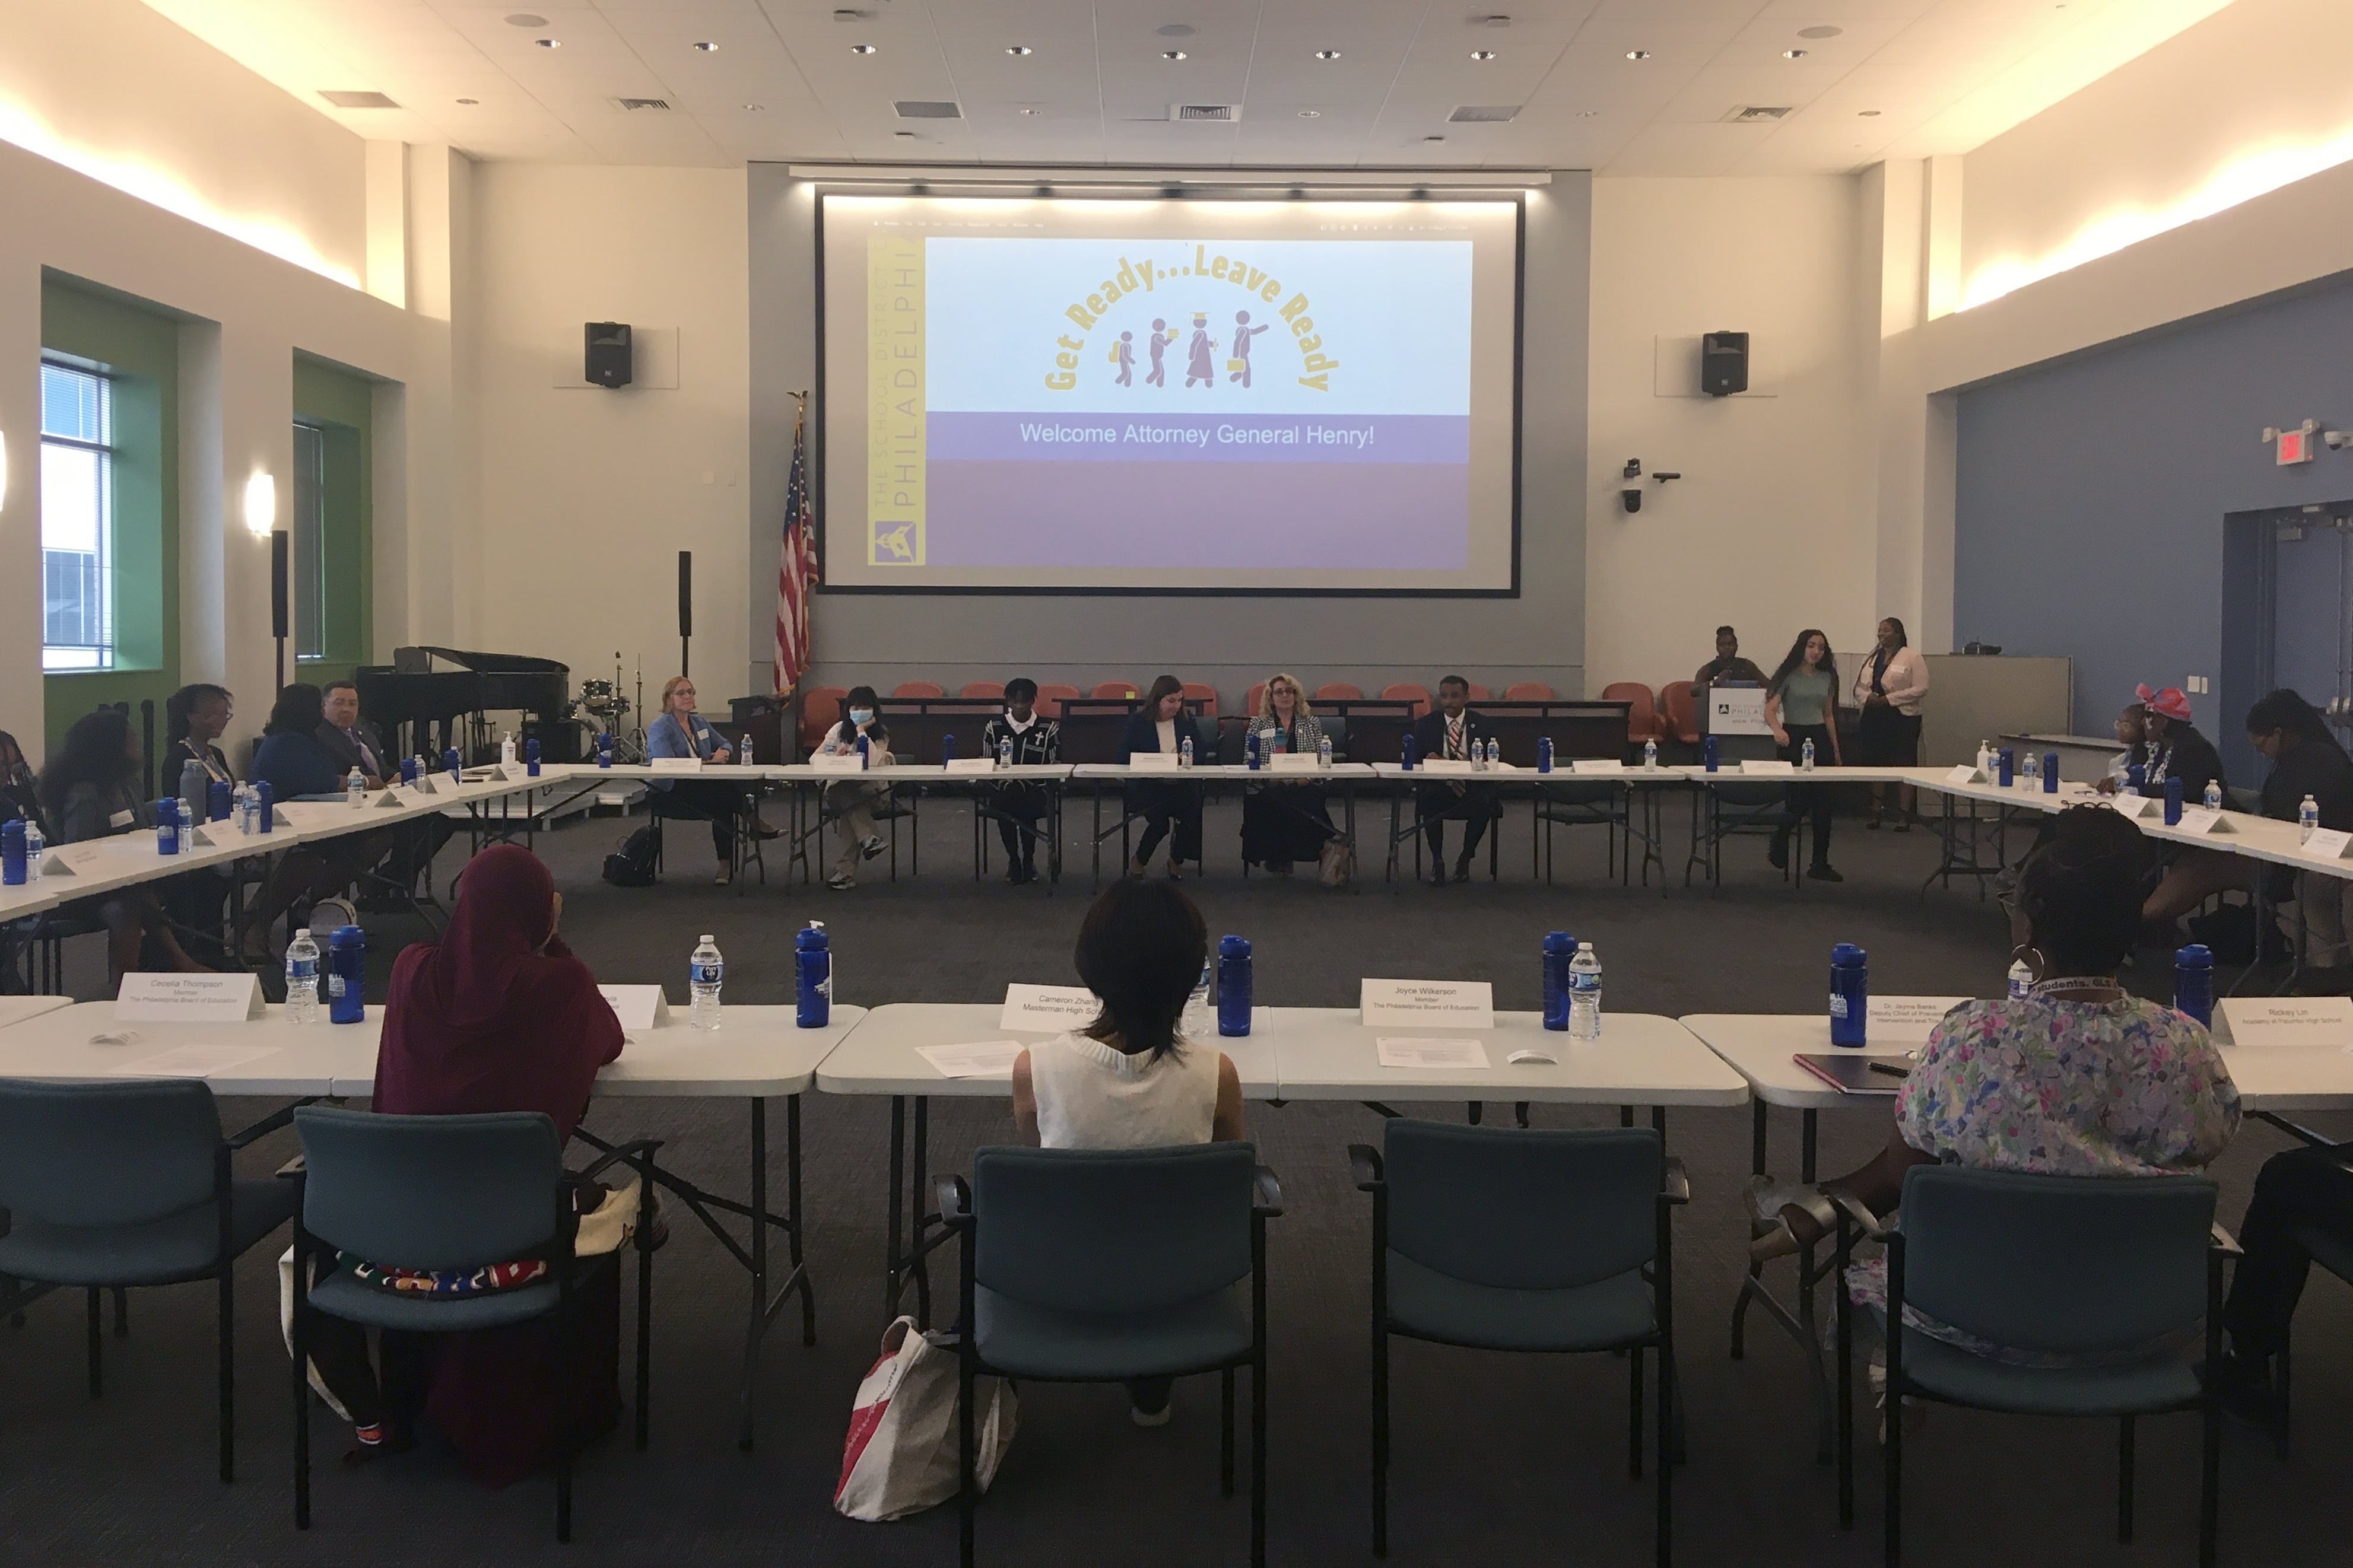 Students talk about gun violence and mental health during a roundtable discussion at the Philadelphia School District building on Friday, Aug. 4, 2023 in Philadelphia, Penn.